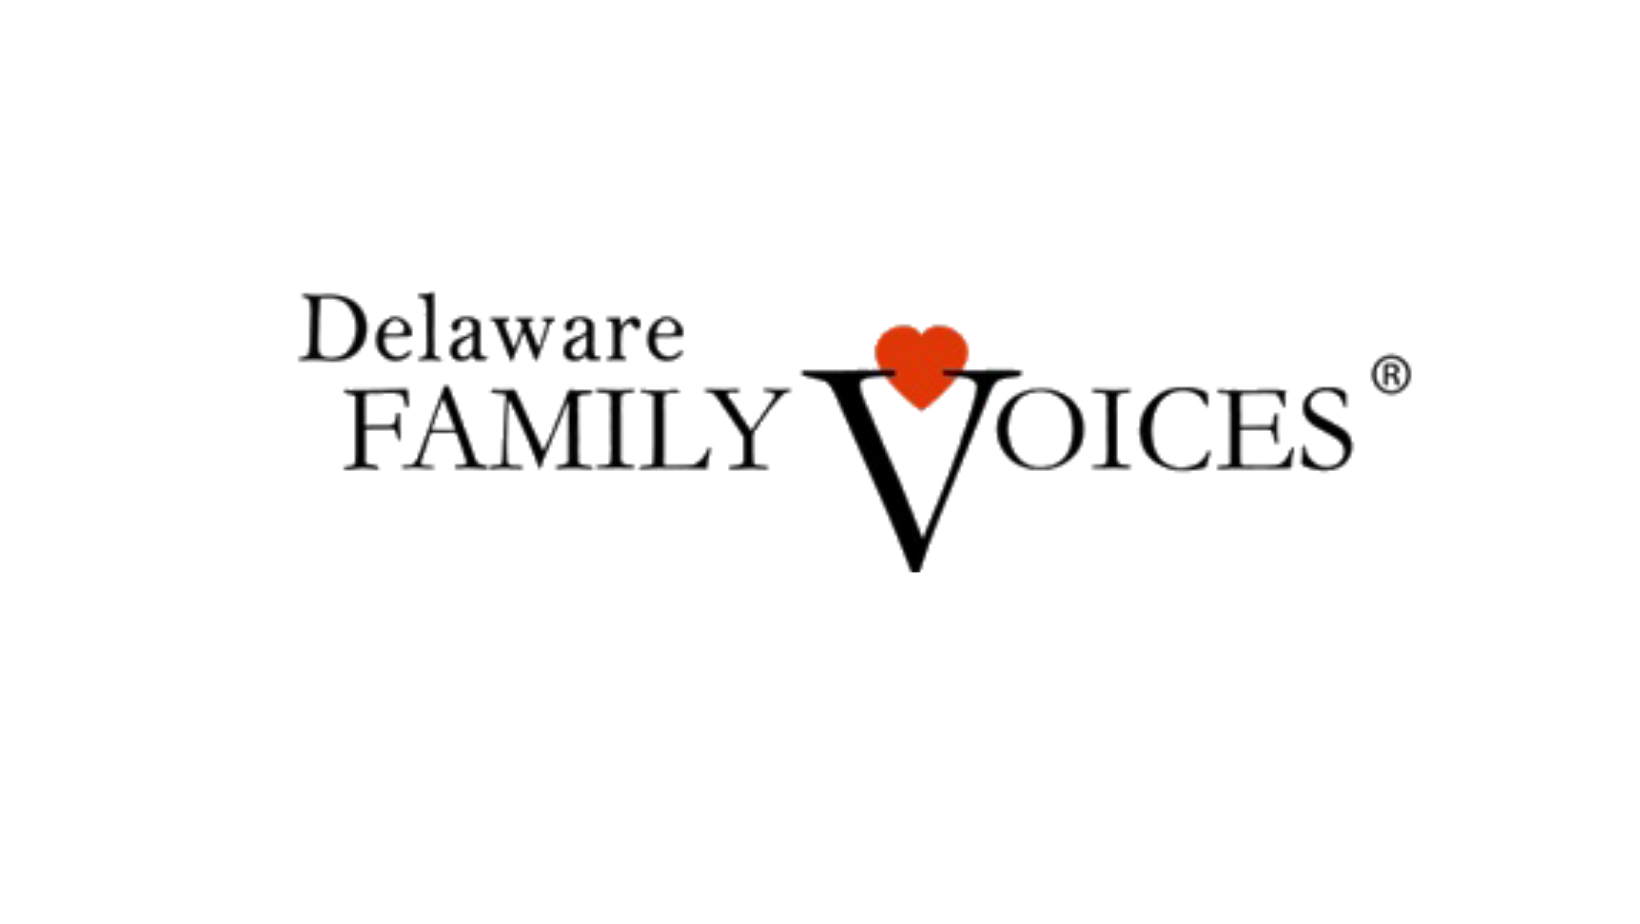 Delaware Family Voices